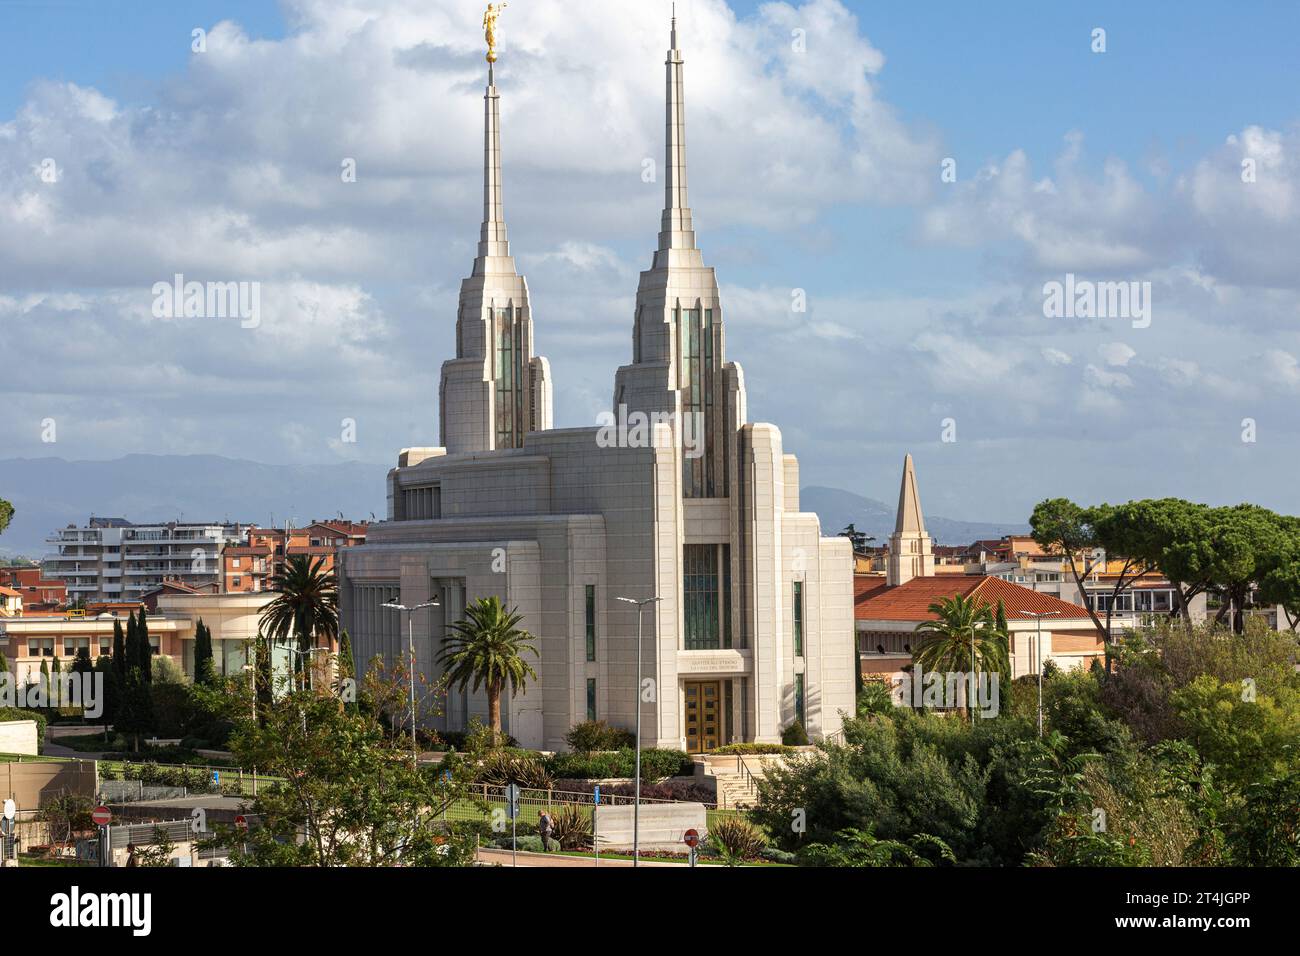 Mormon church or Temple of The Church of Jesus Christ of Latter-day Saints in Rome Stock Photo